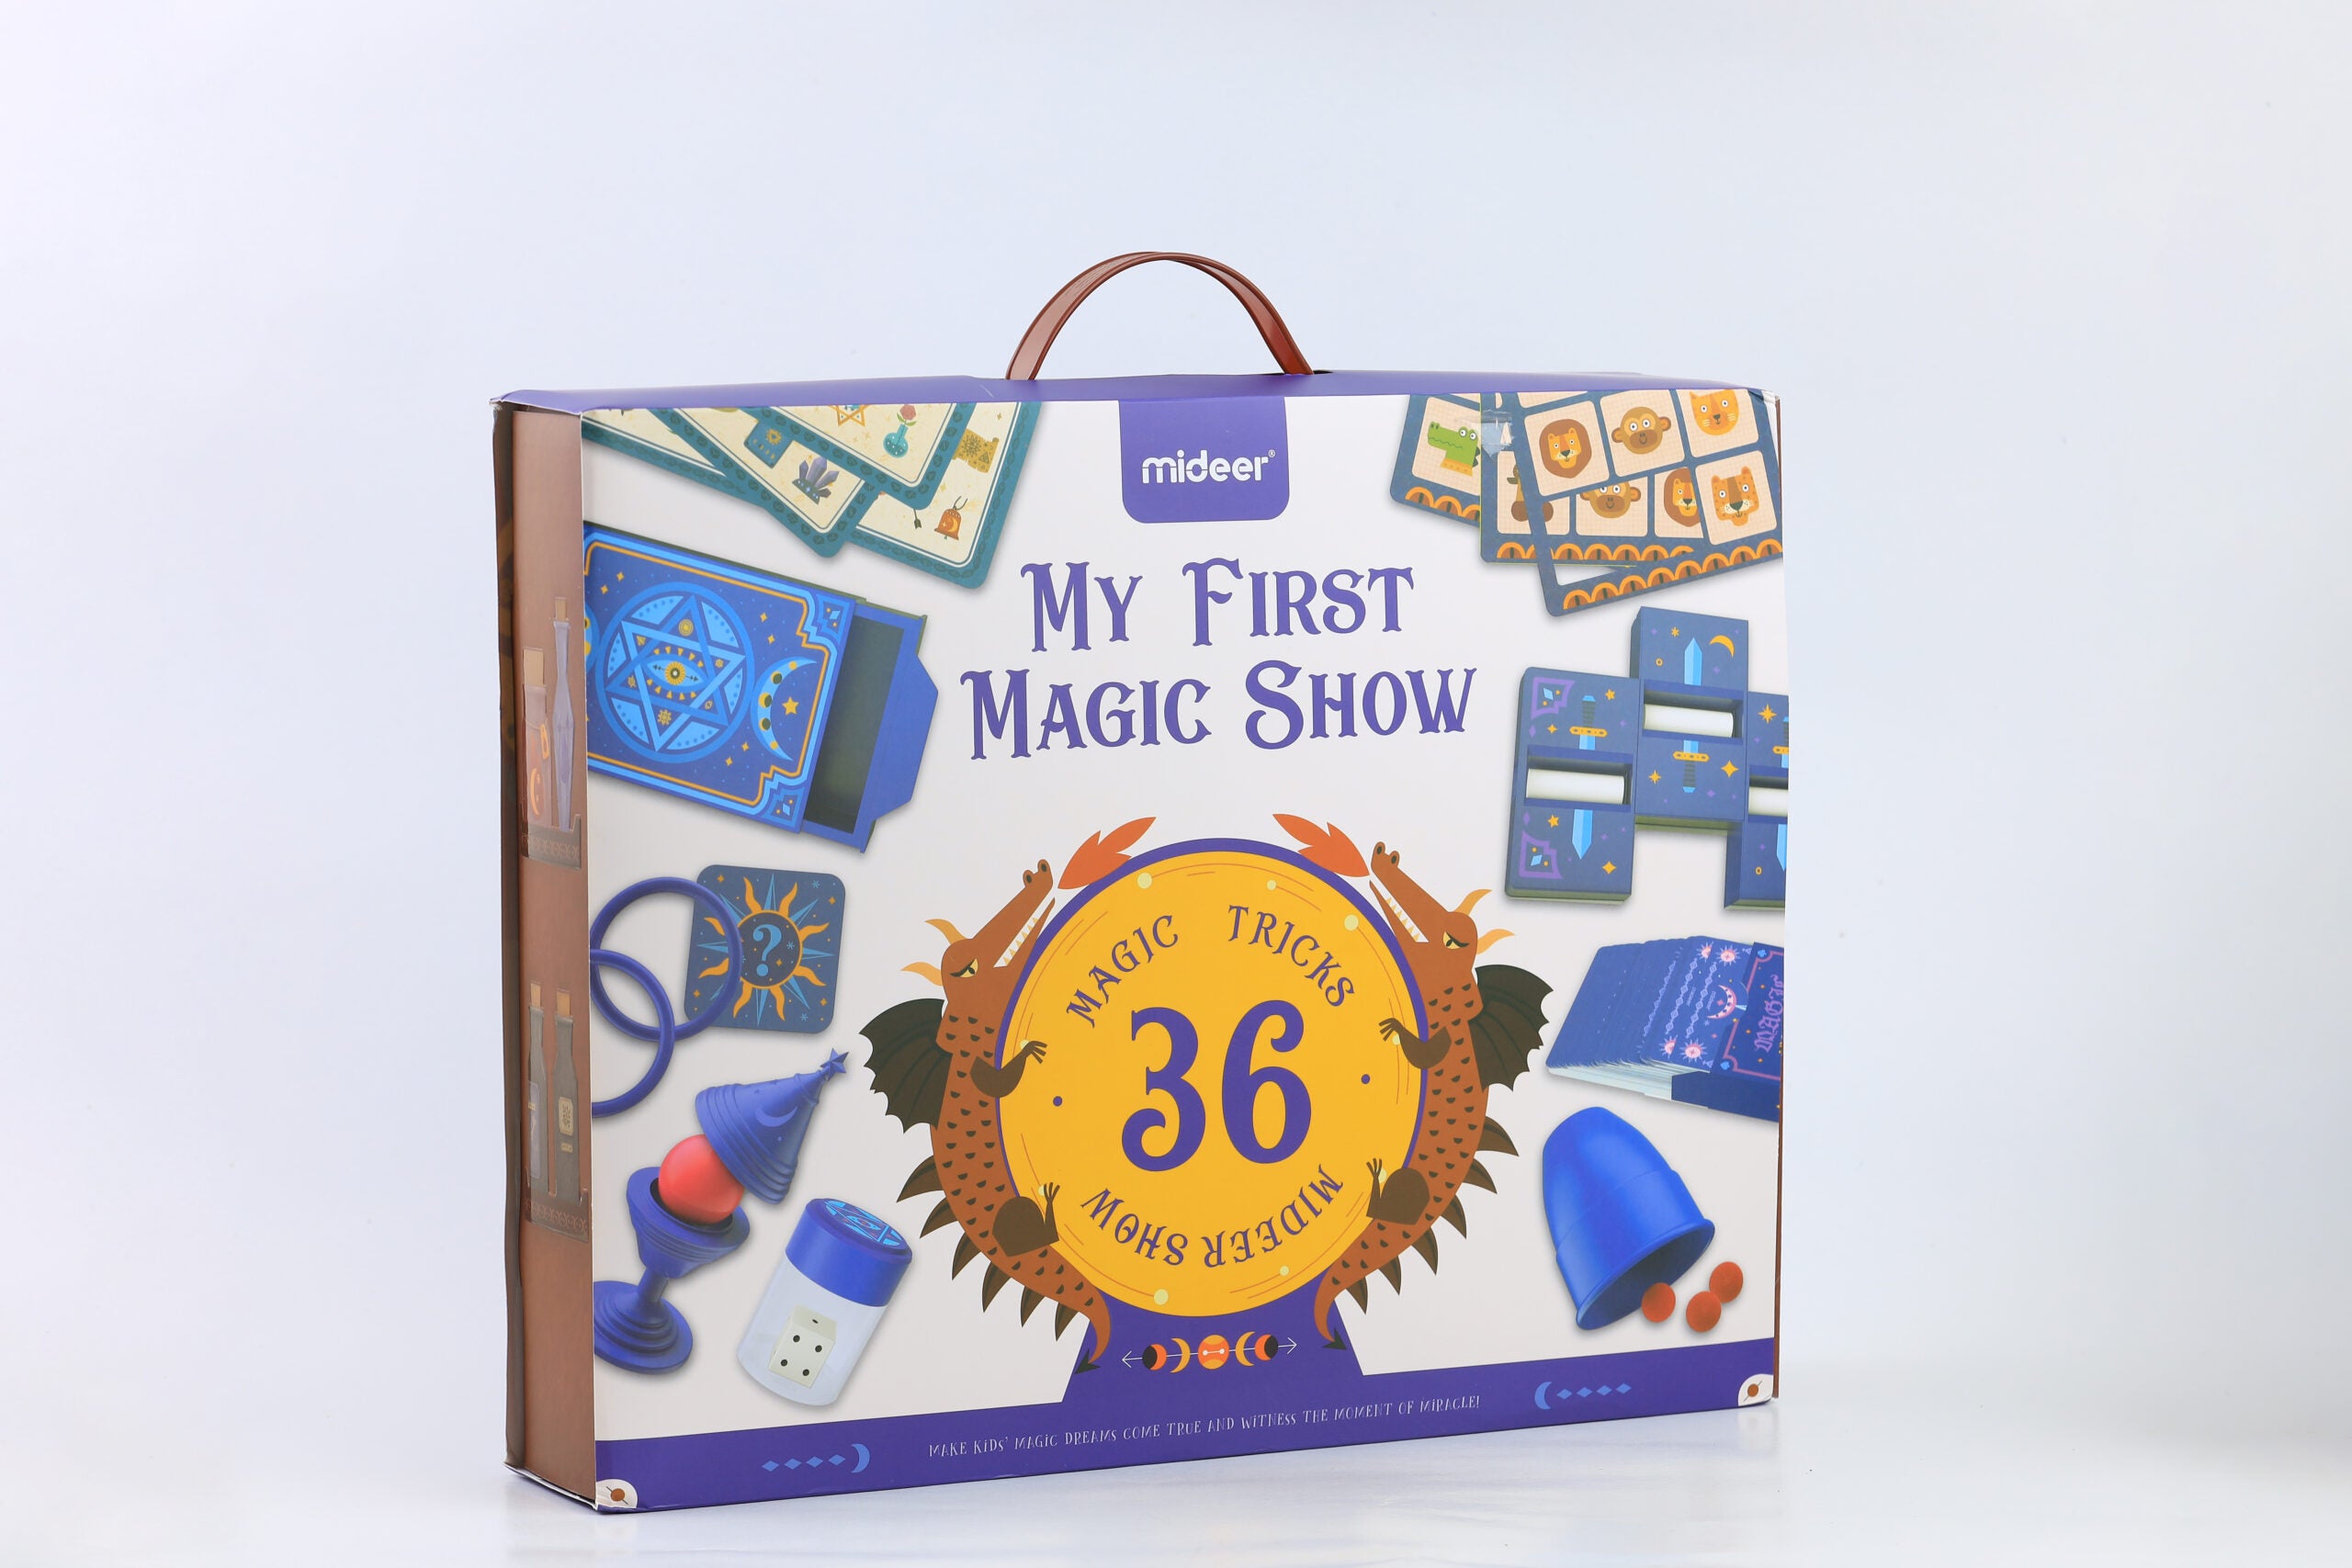 Mideer My First Magic Show – 36 games